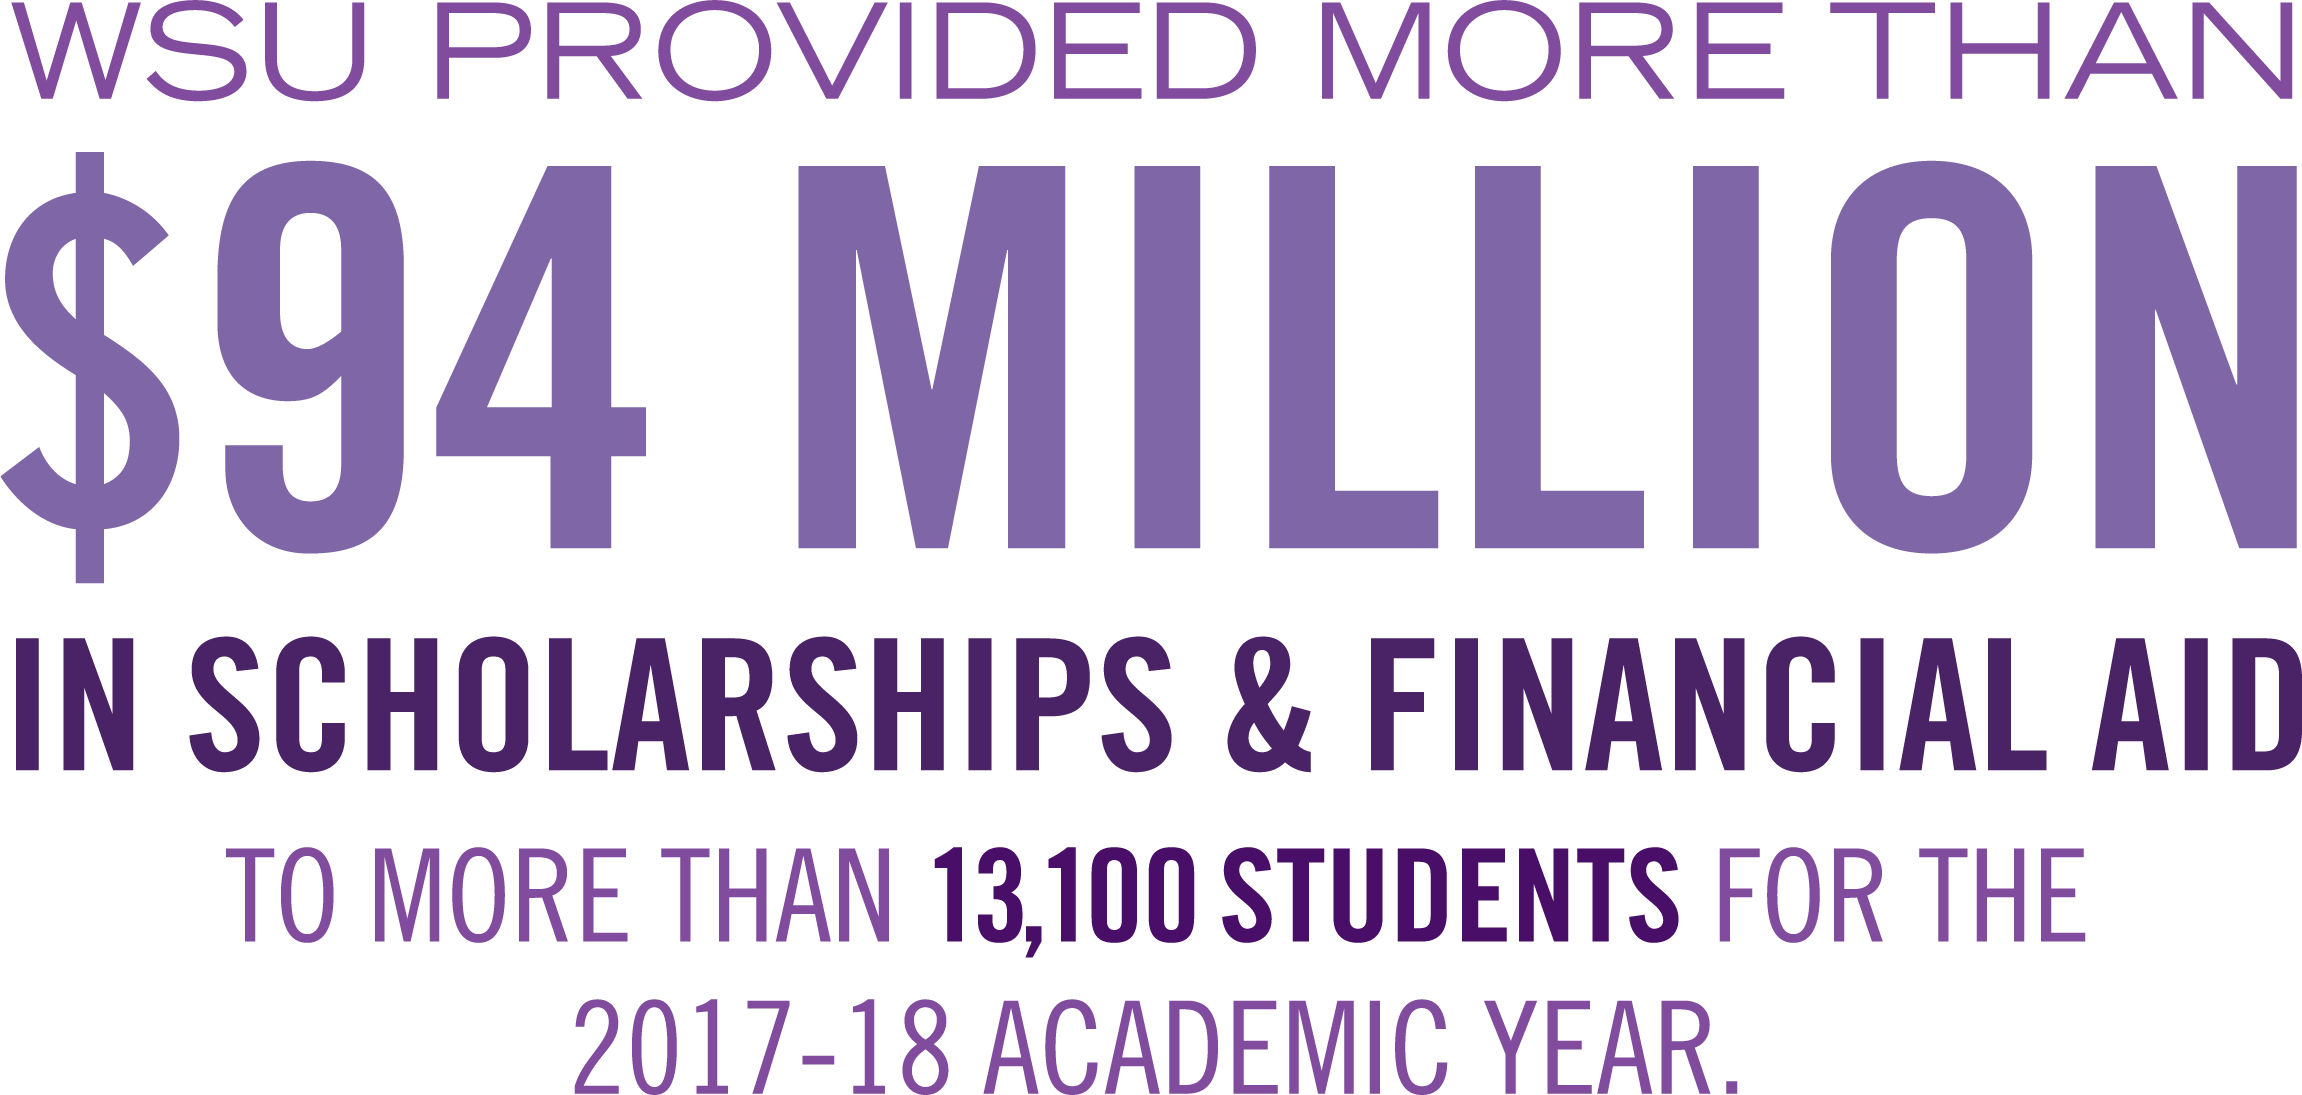 wsu provided more than $94 million in scholarships $ financial aid to more than 13,100 students for the 2017-18 academic year